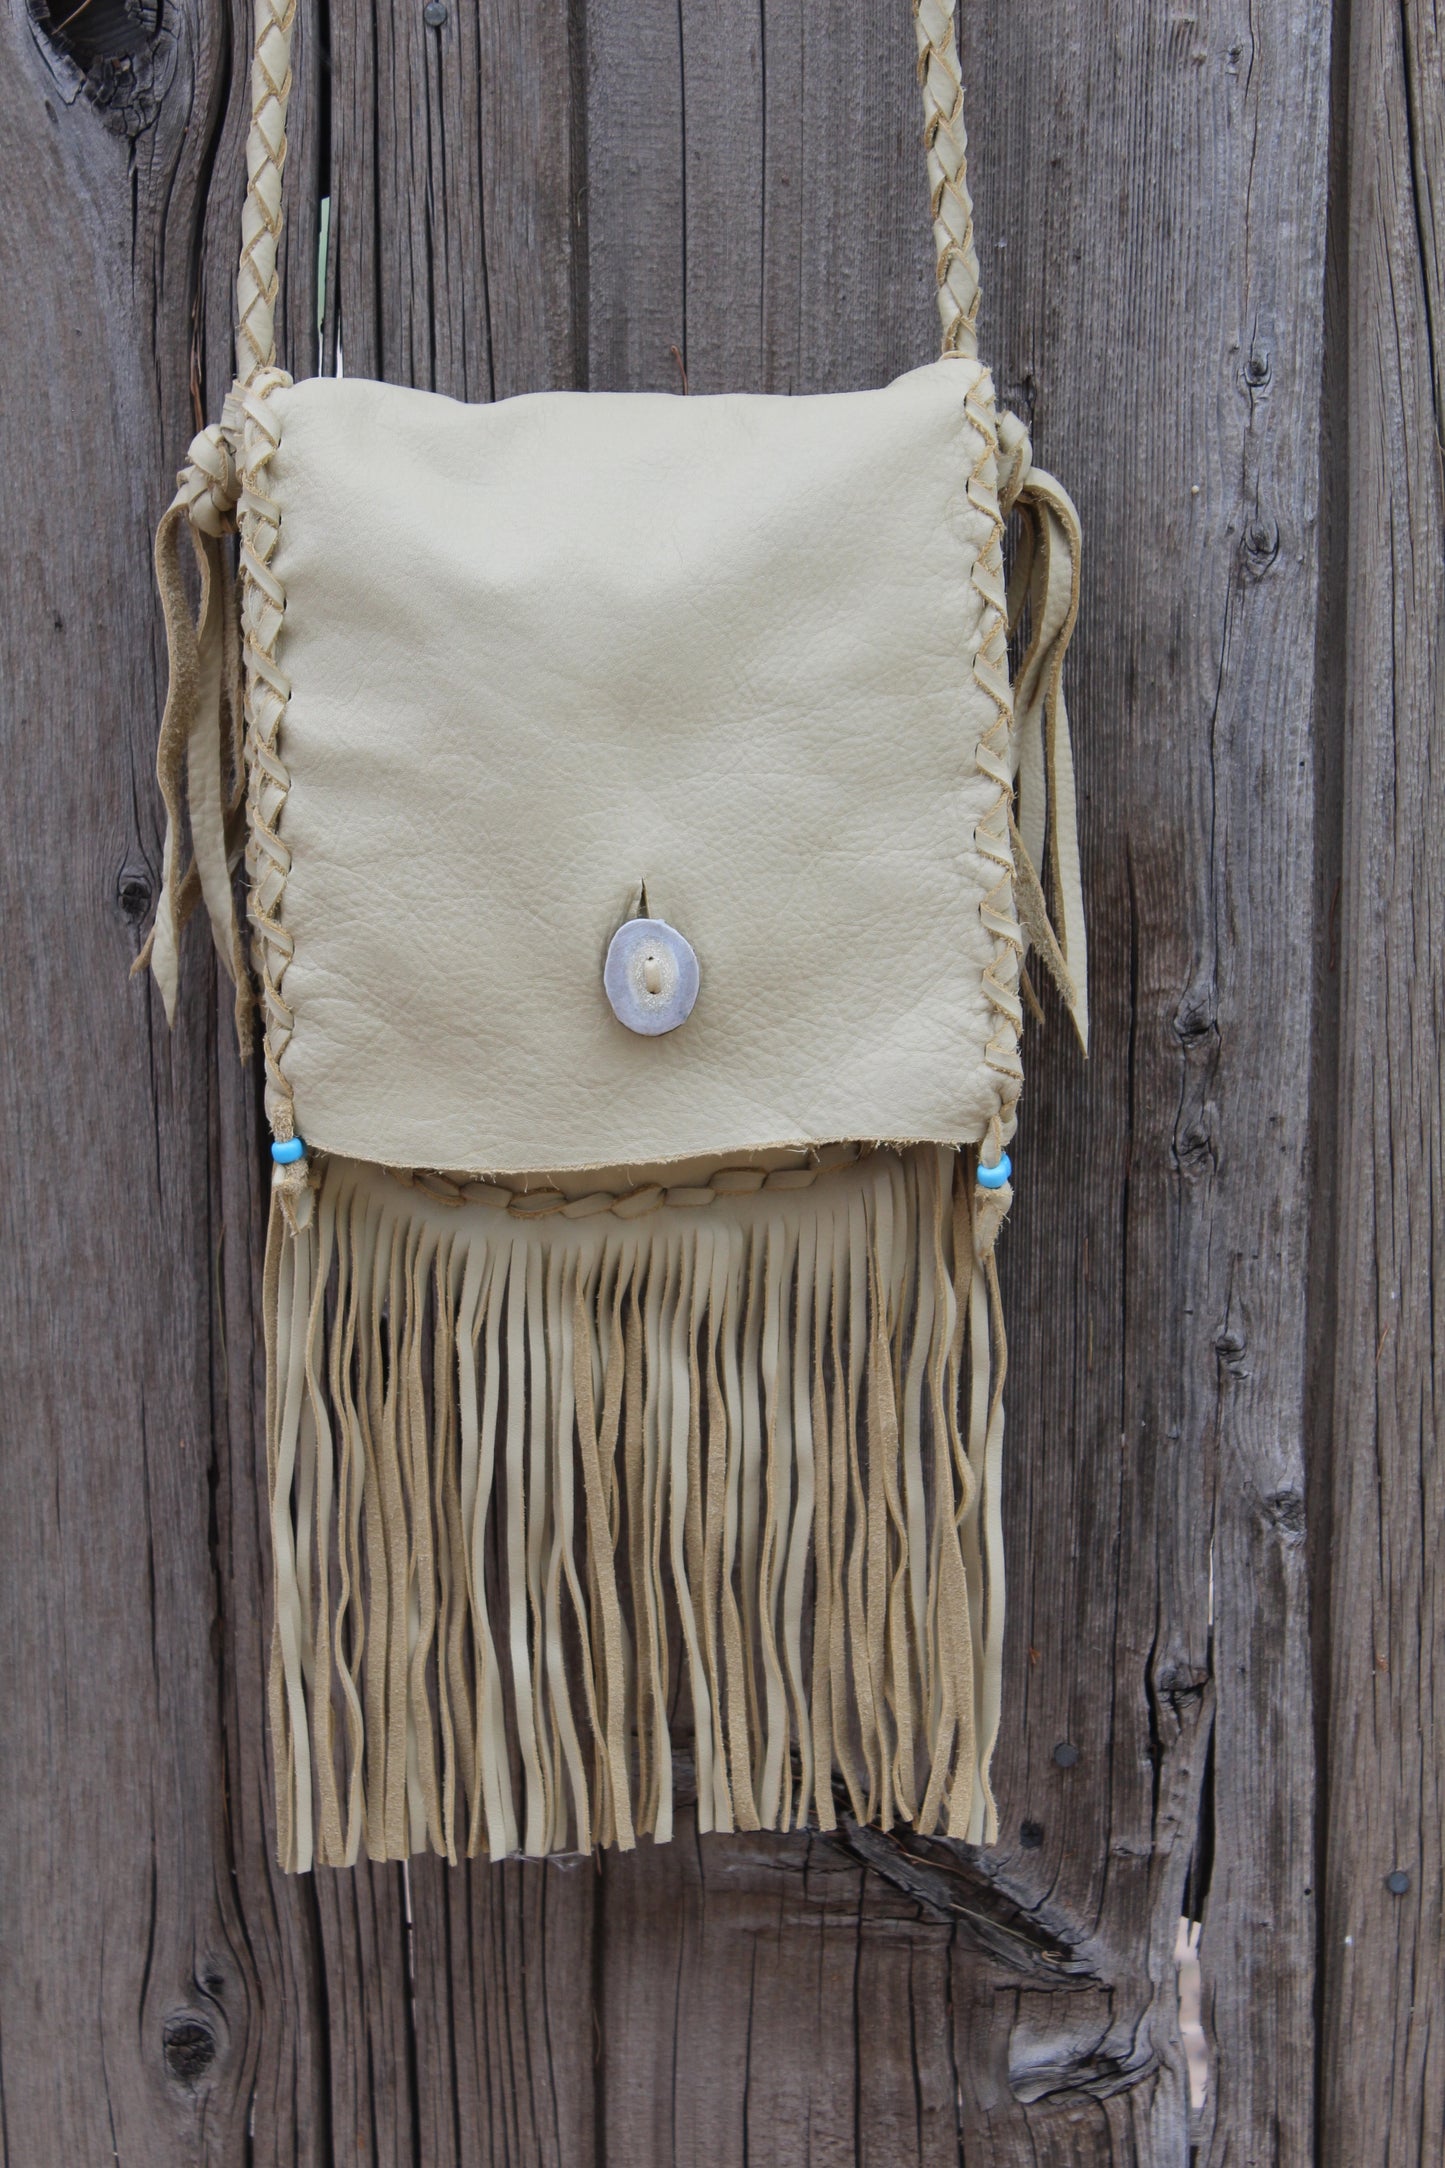 Fringed leather handbag, ready to ship, handstitched leather purse